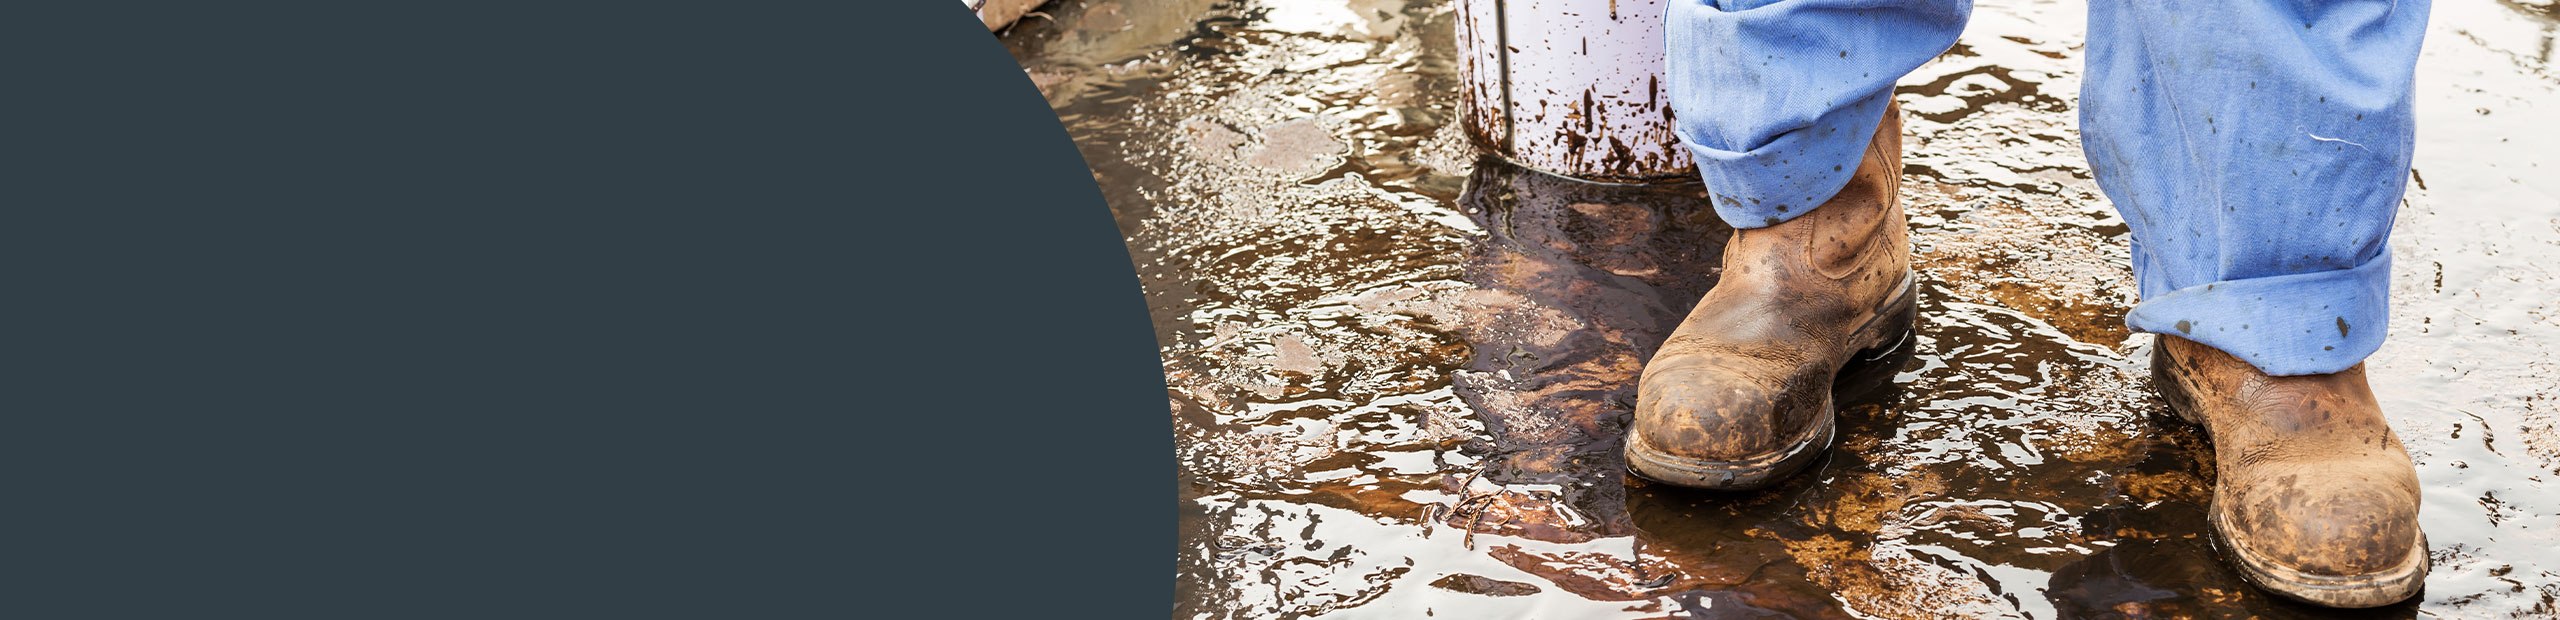 Oil Spill Cleaning Services Dartford